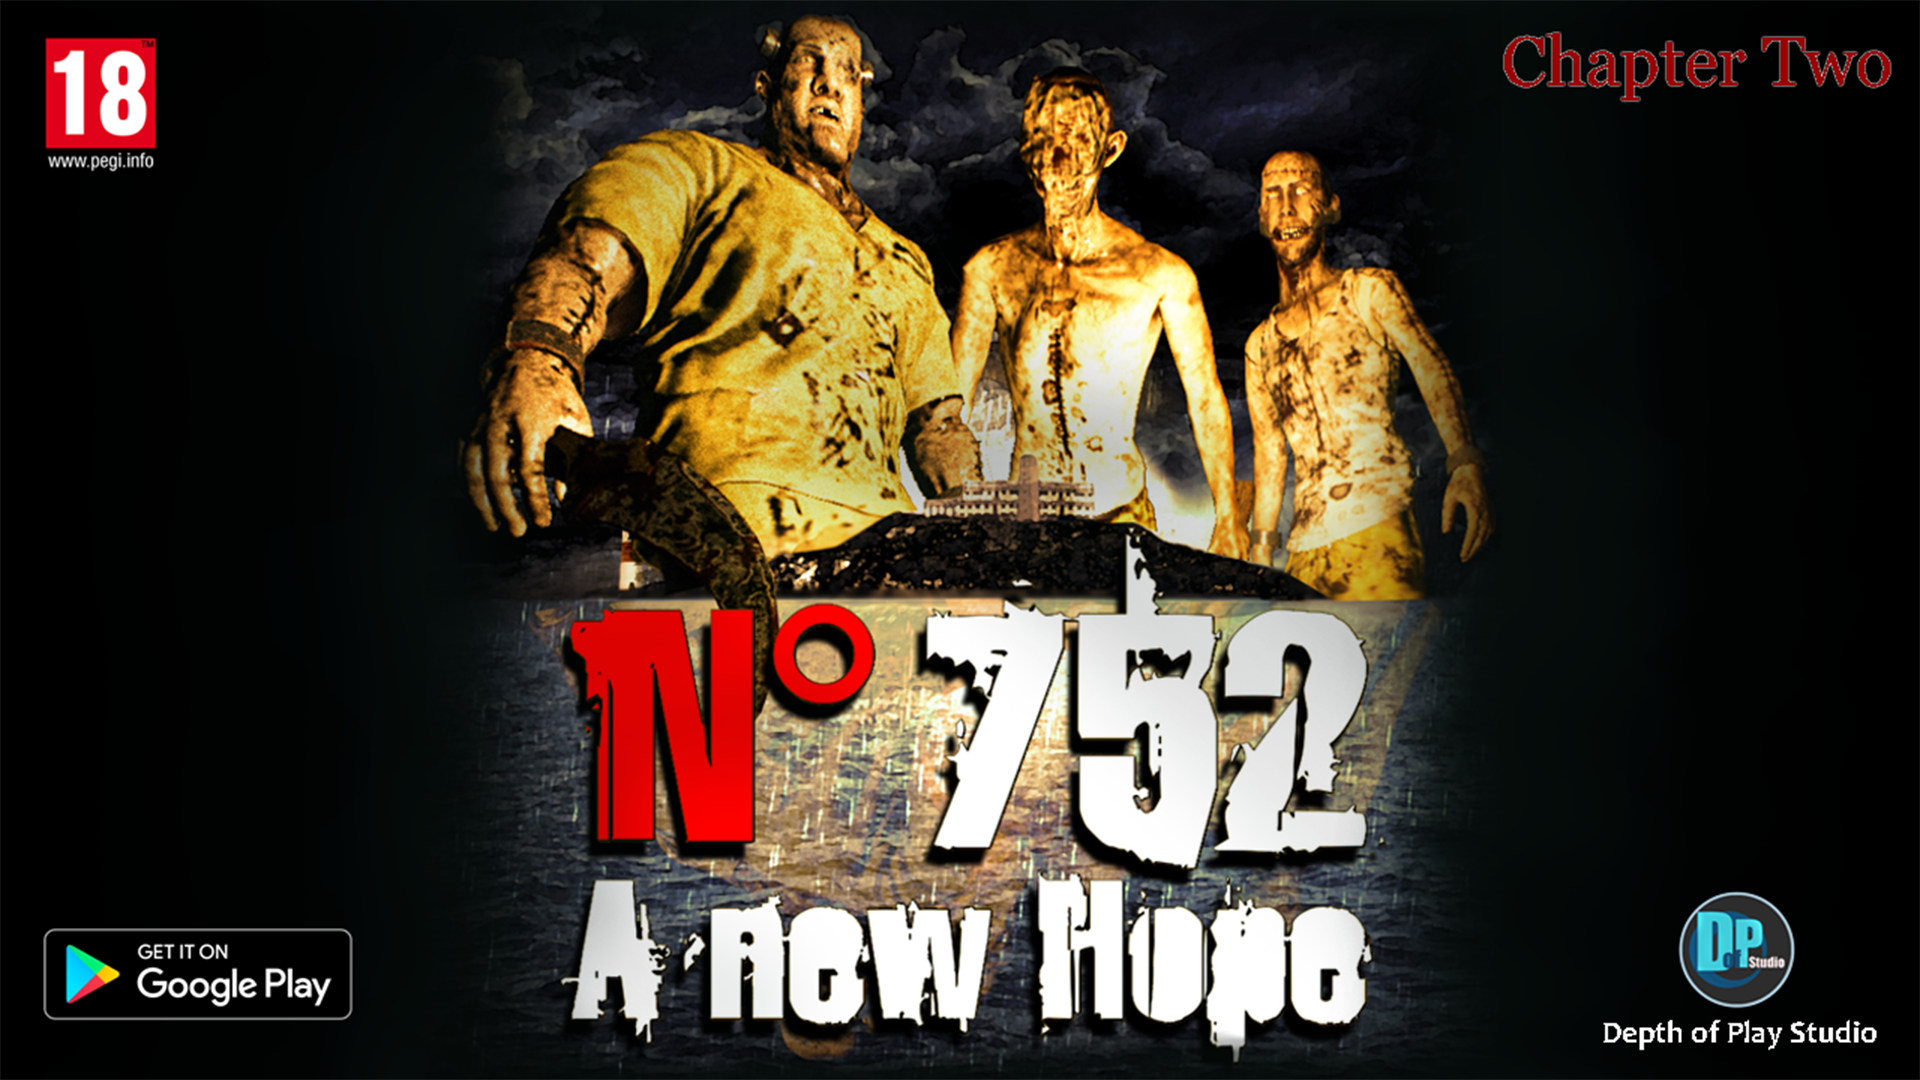 N752 A New Hope-Survival Horror in the prison (Chapter Two)